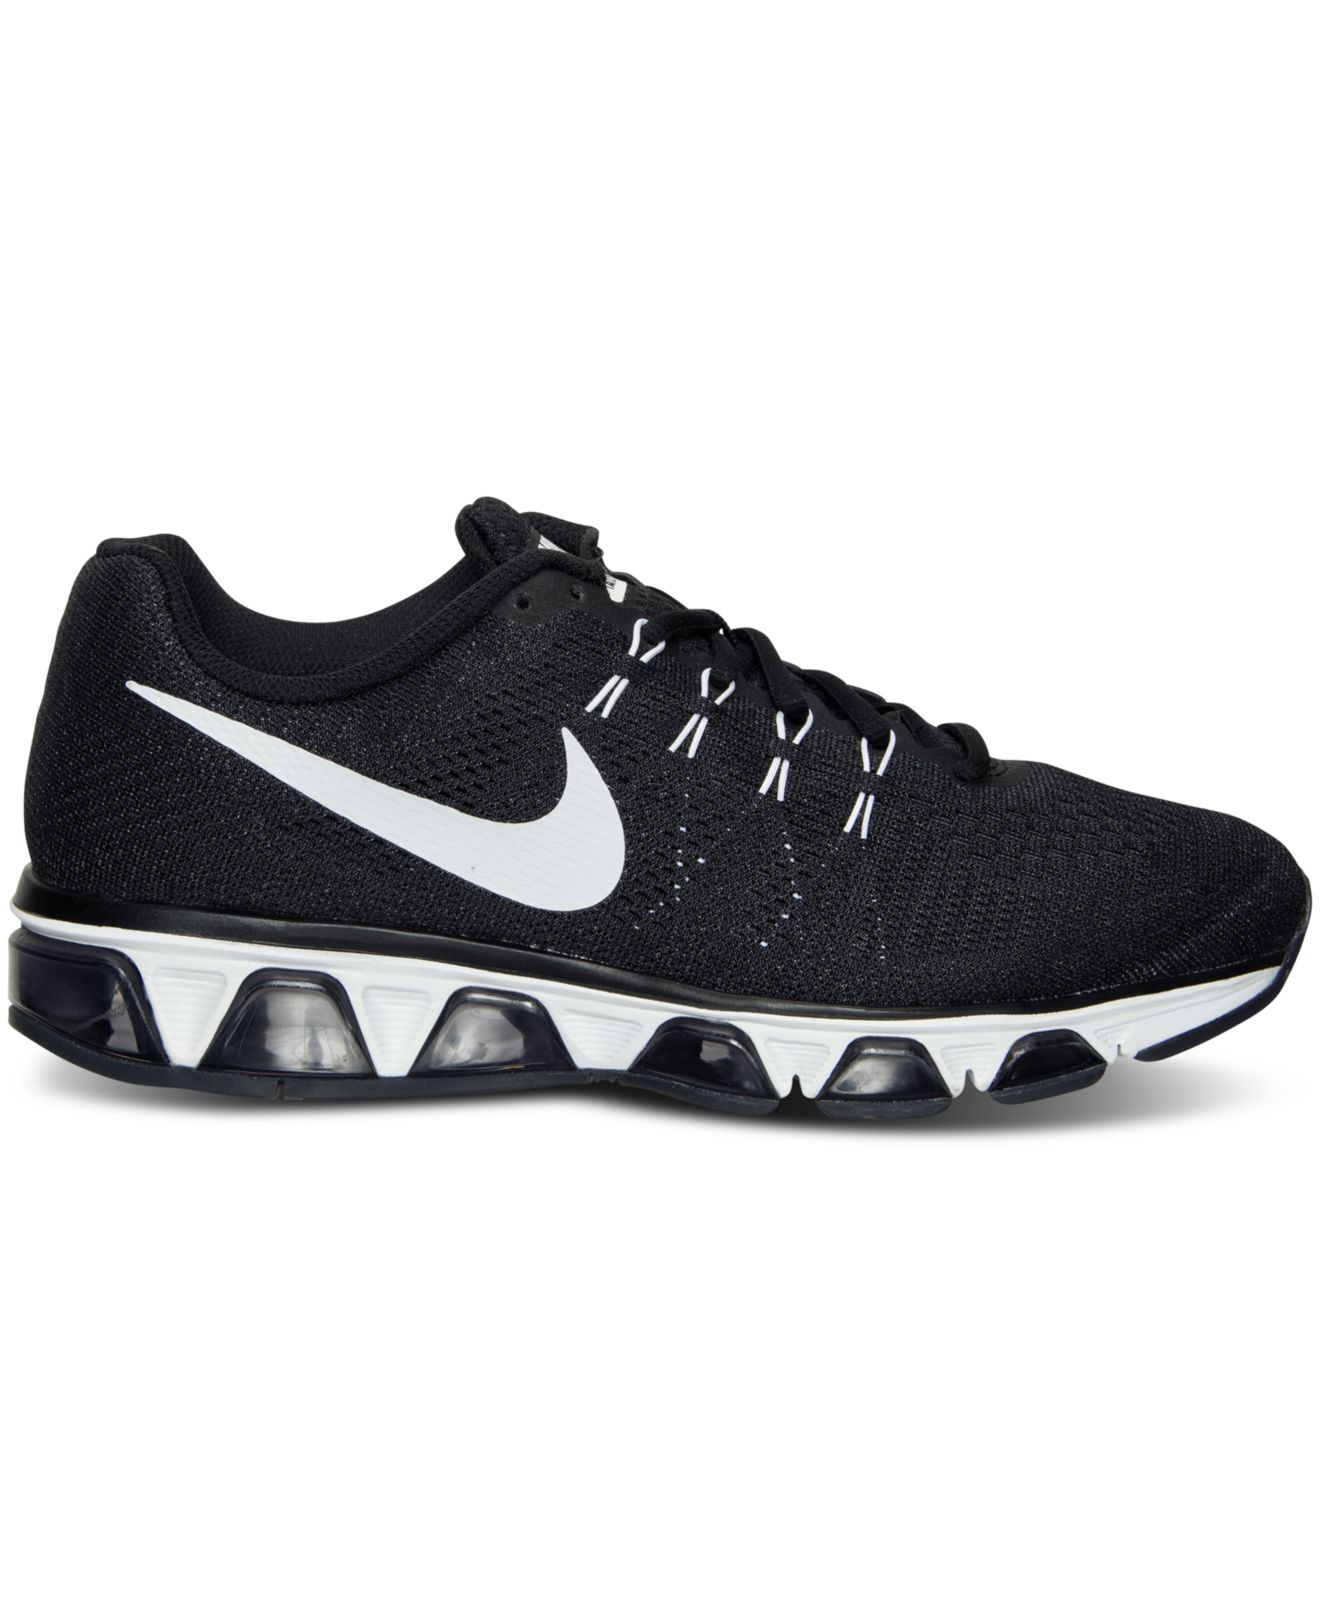 Lyst - Nike Men's Air Max Tailwind 8 Running Sneakers From Finish Line ...